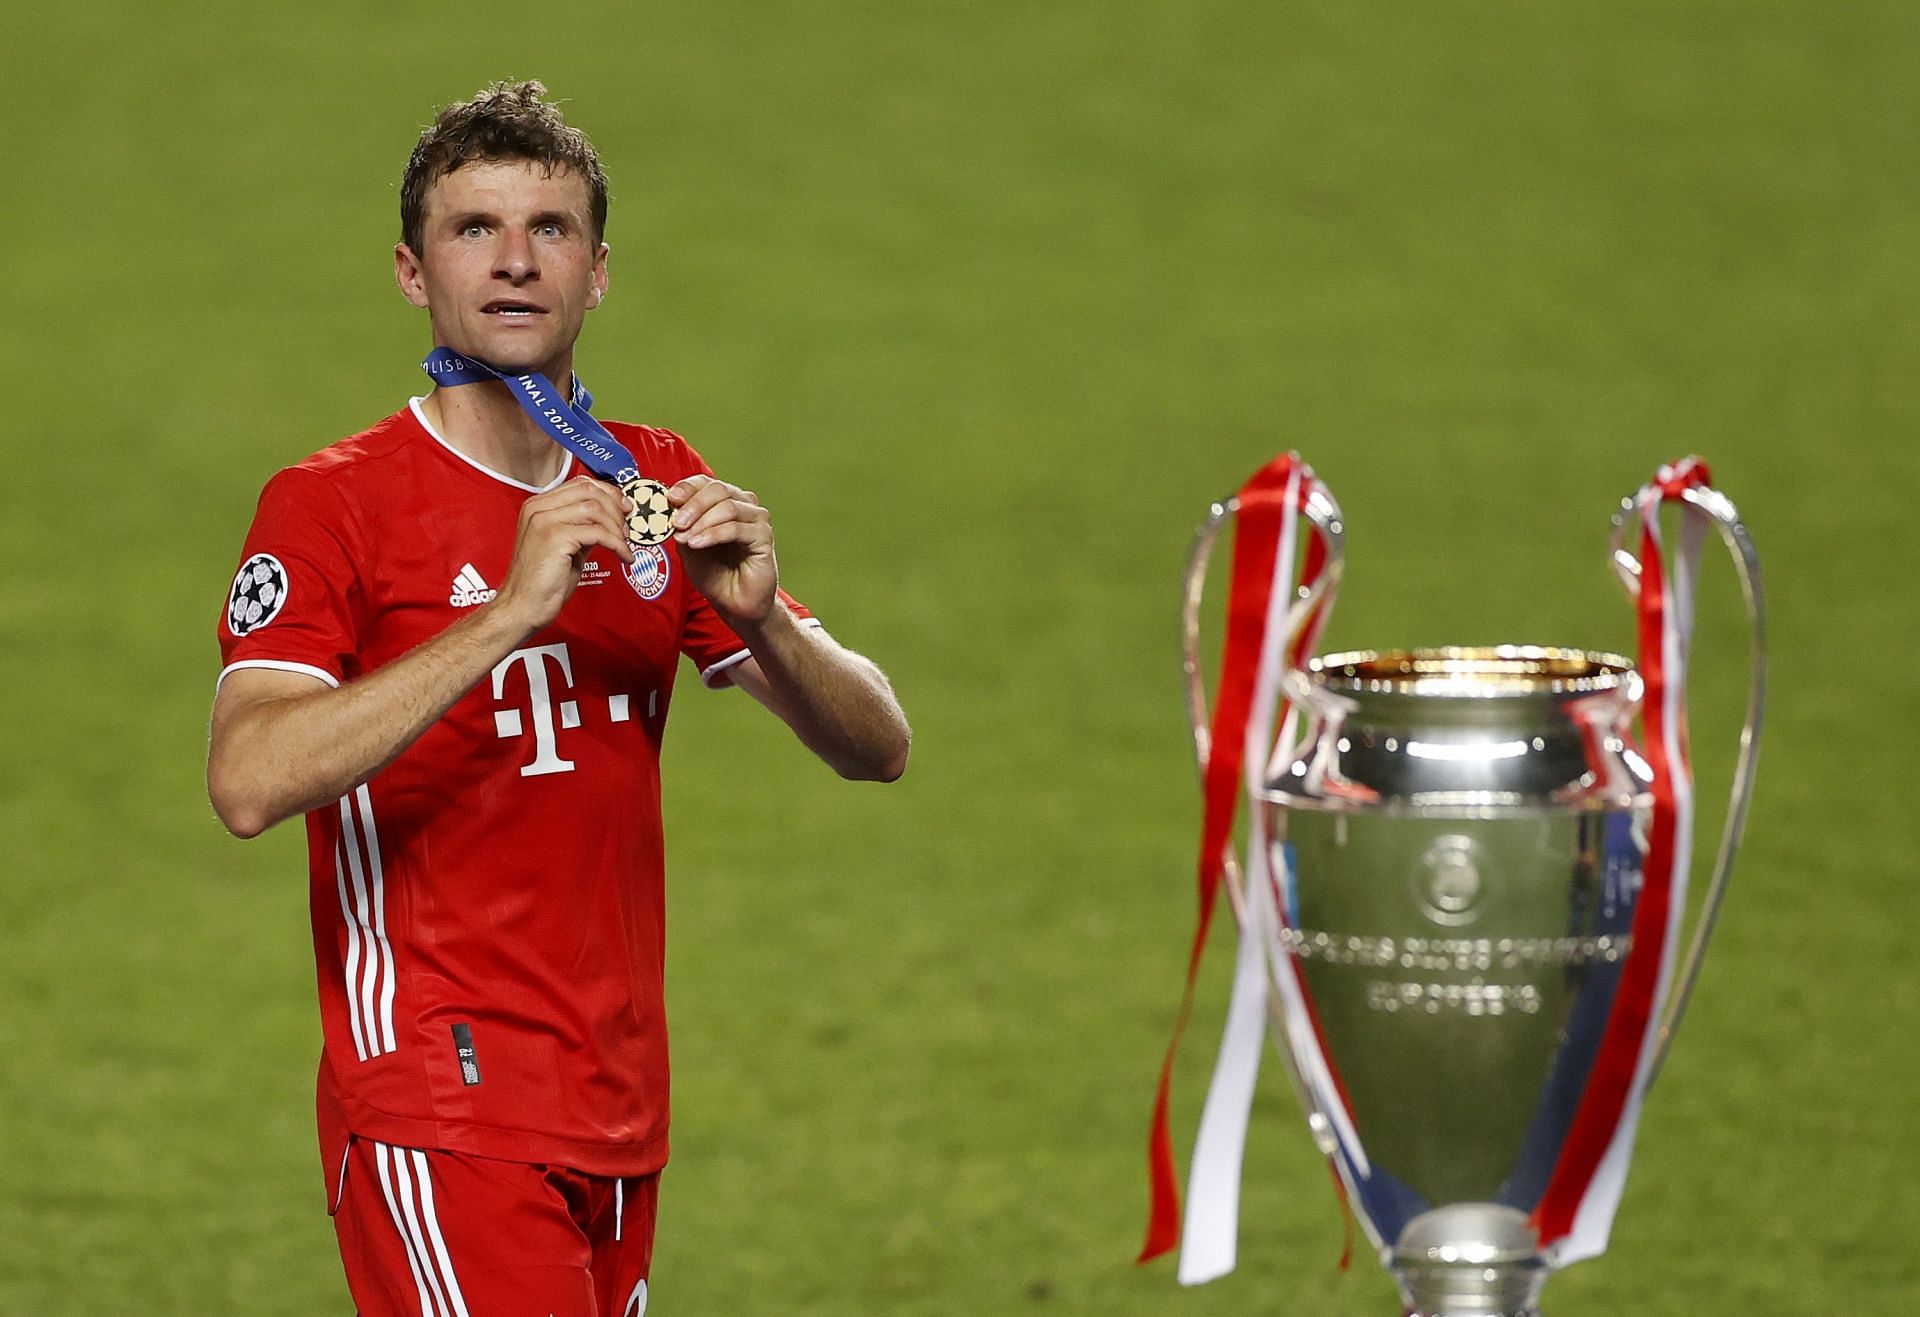 Muller continues to impress at the age of 32